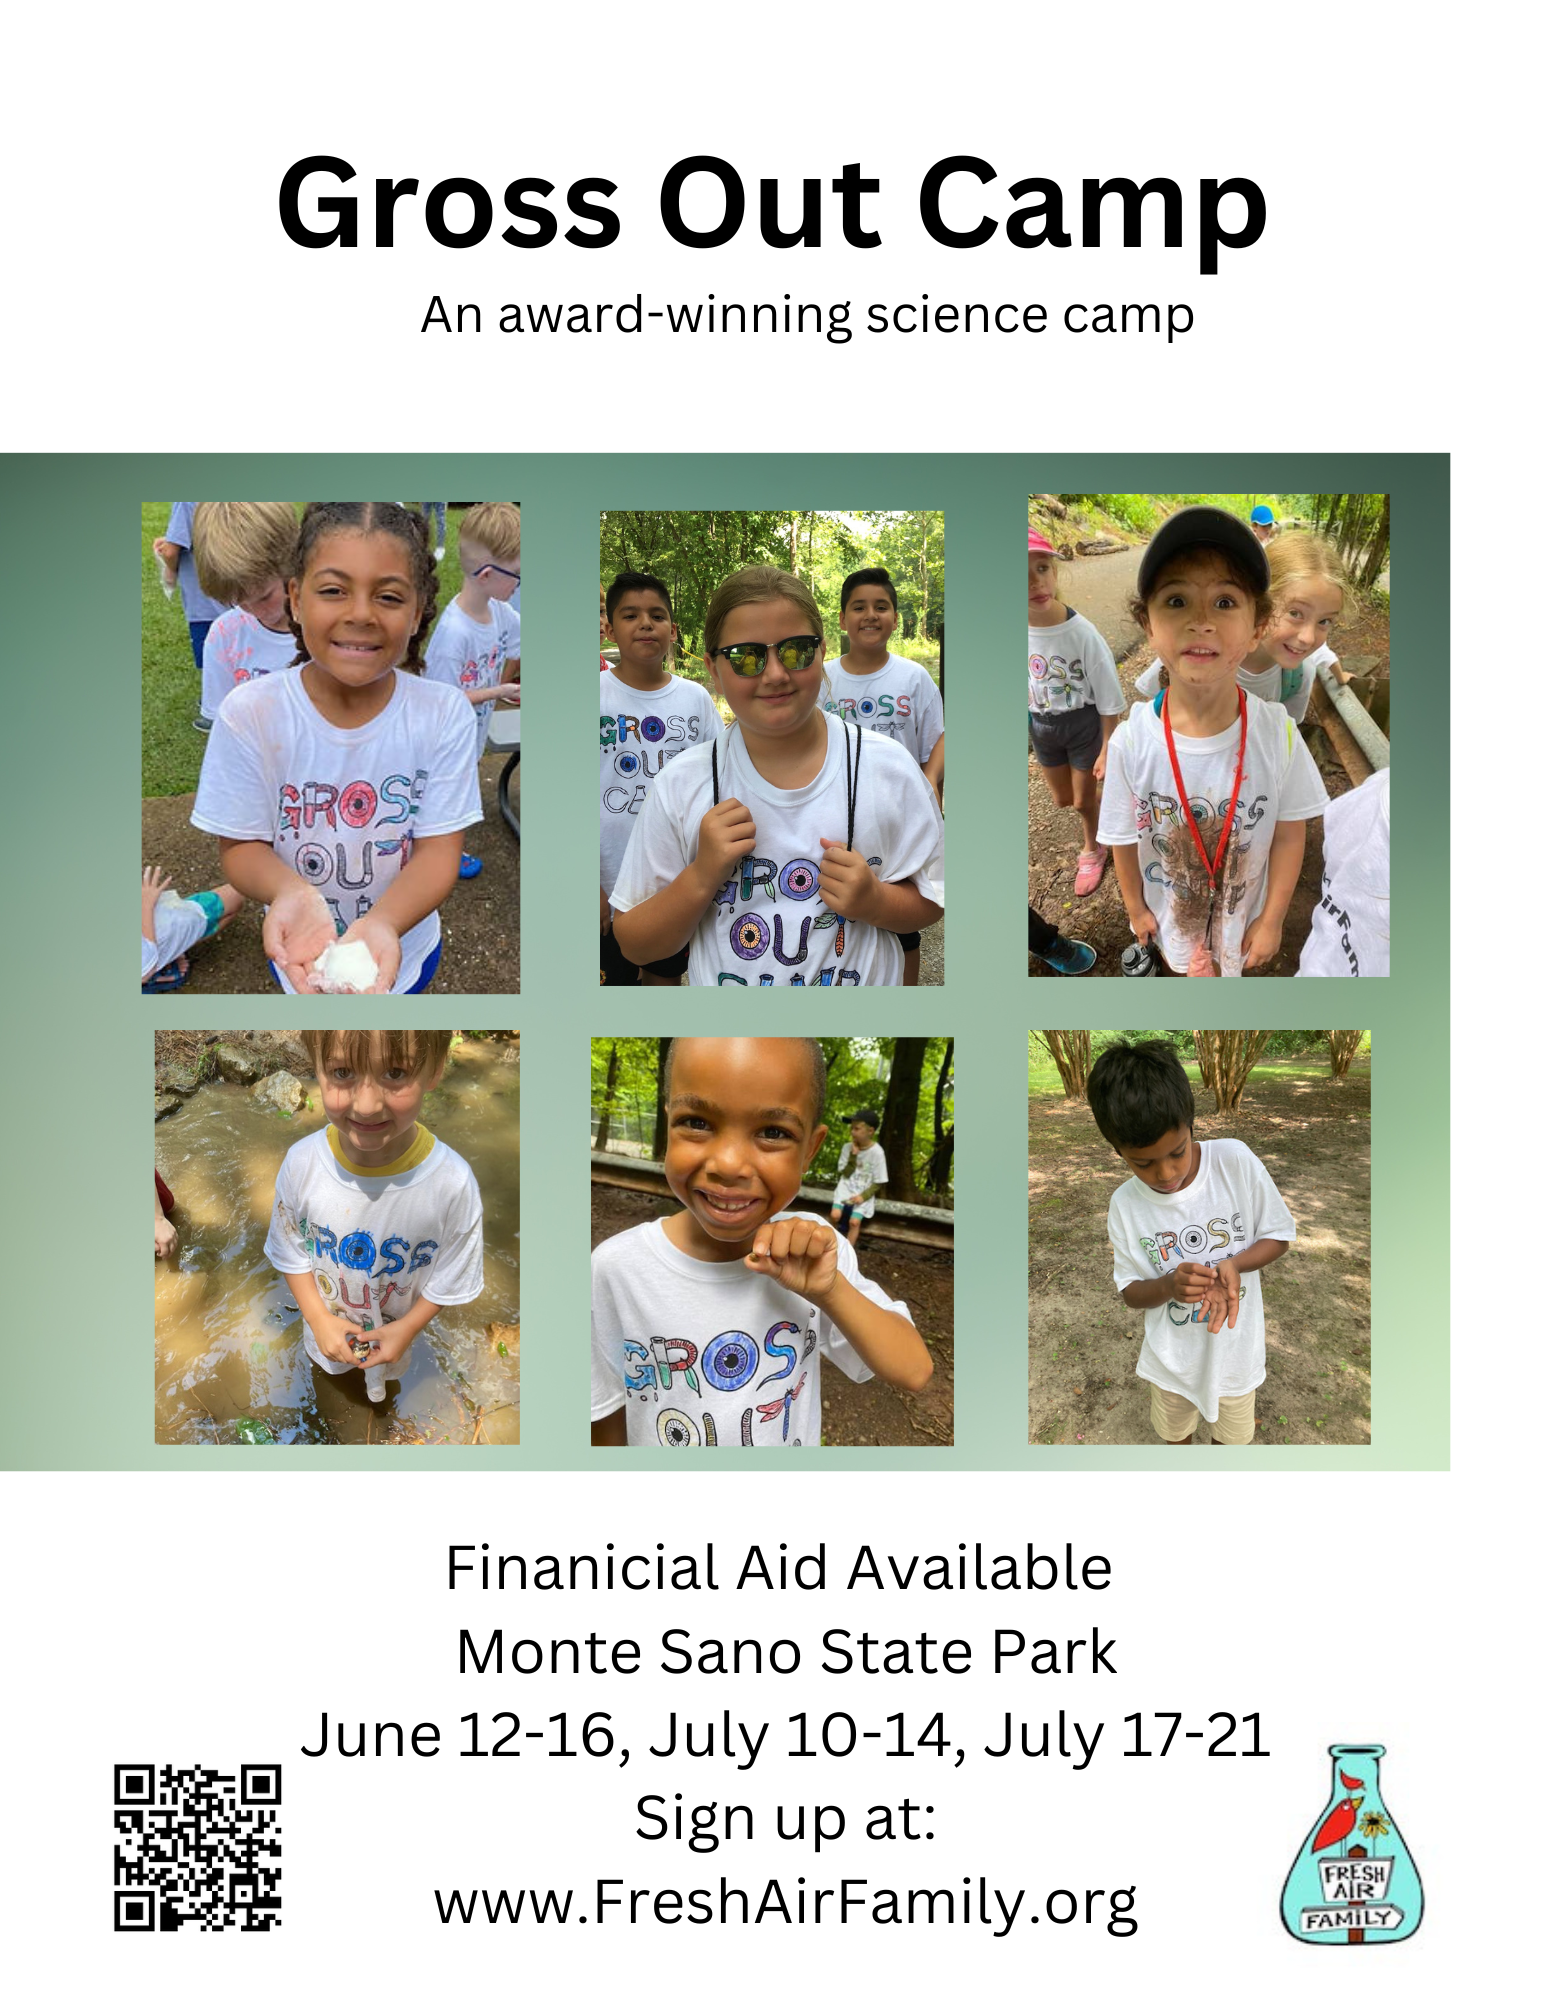 Monte Sano State Park Gross Out Camps